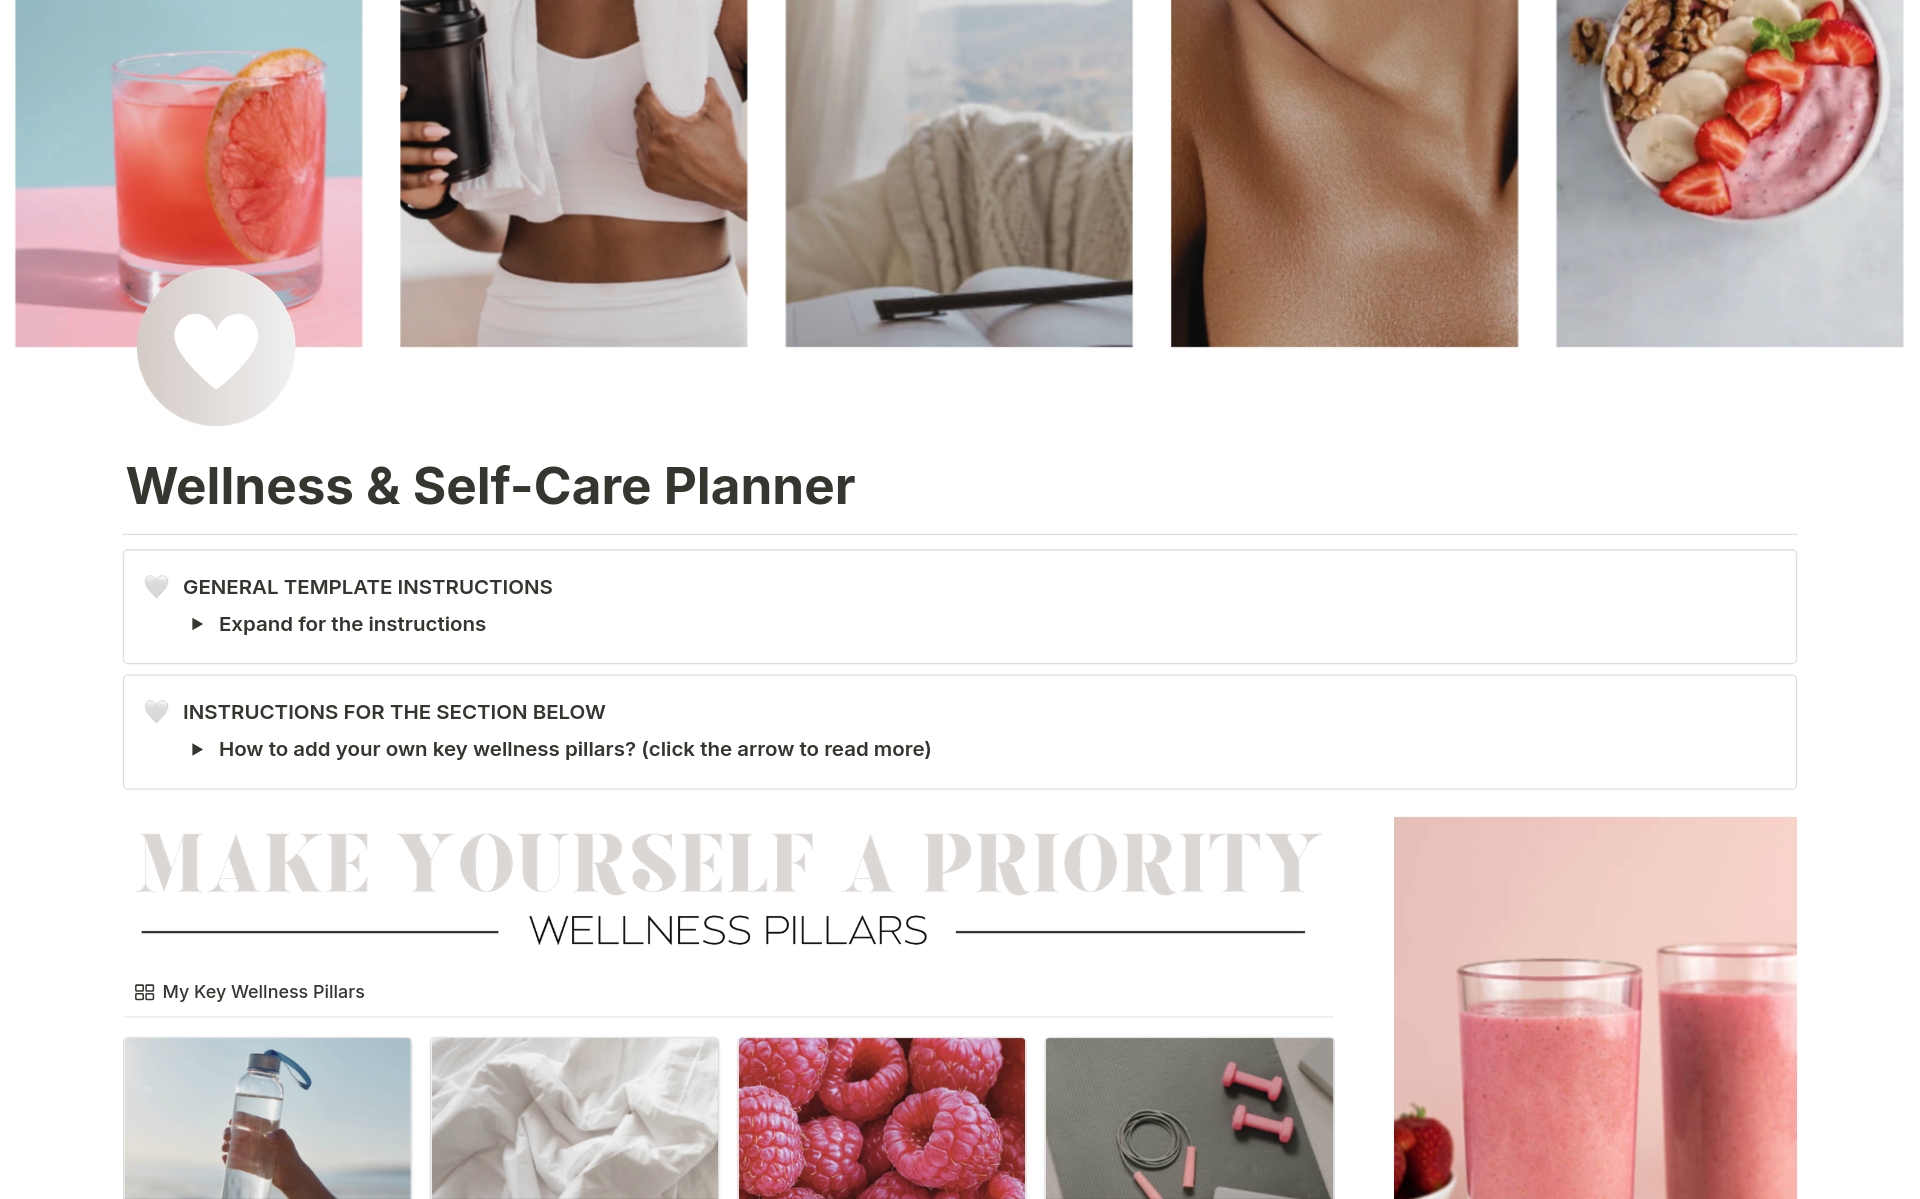 This template is designed to support your wellness and self-care journey, providing a simple framework to organize your exercise, self-care, and beauty routines effortlessly. This versatile template adapts to your evolving wellness goals, empowering you to lead a healthier life.